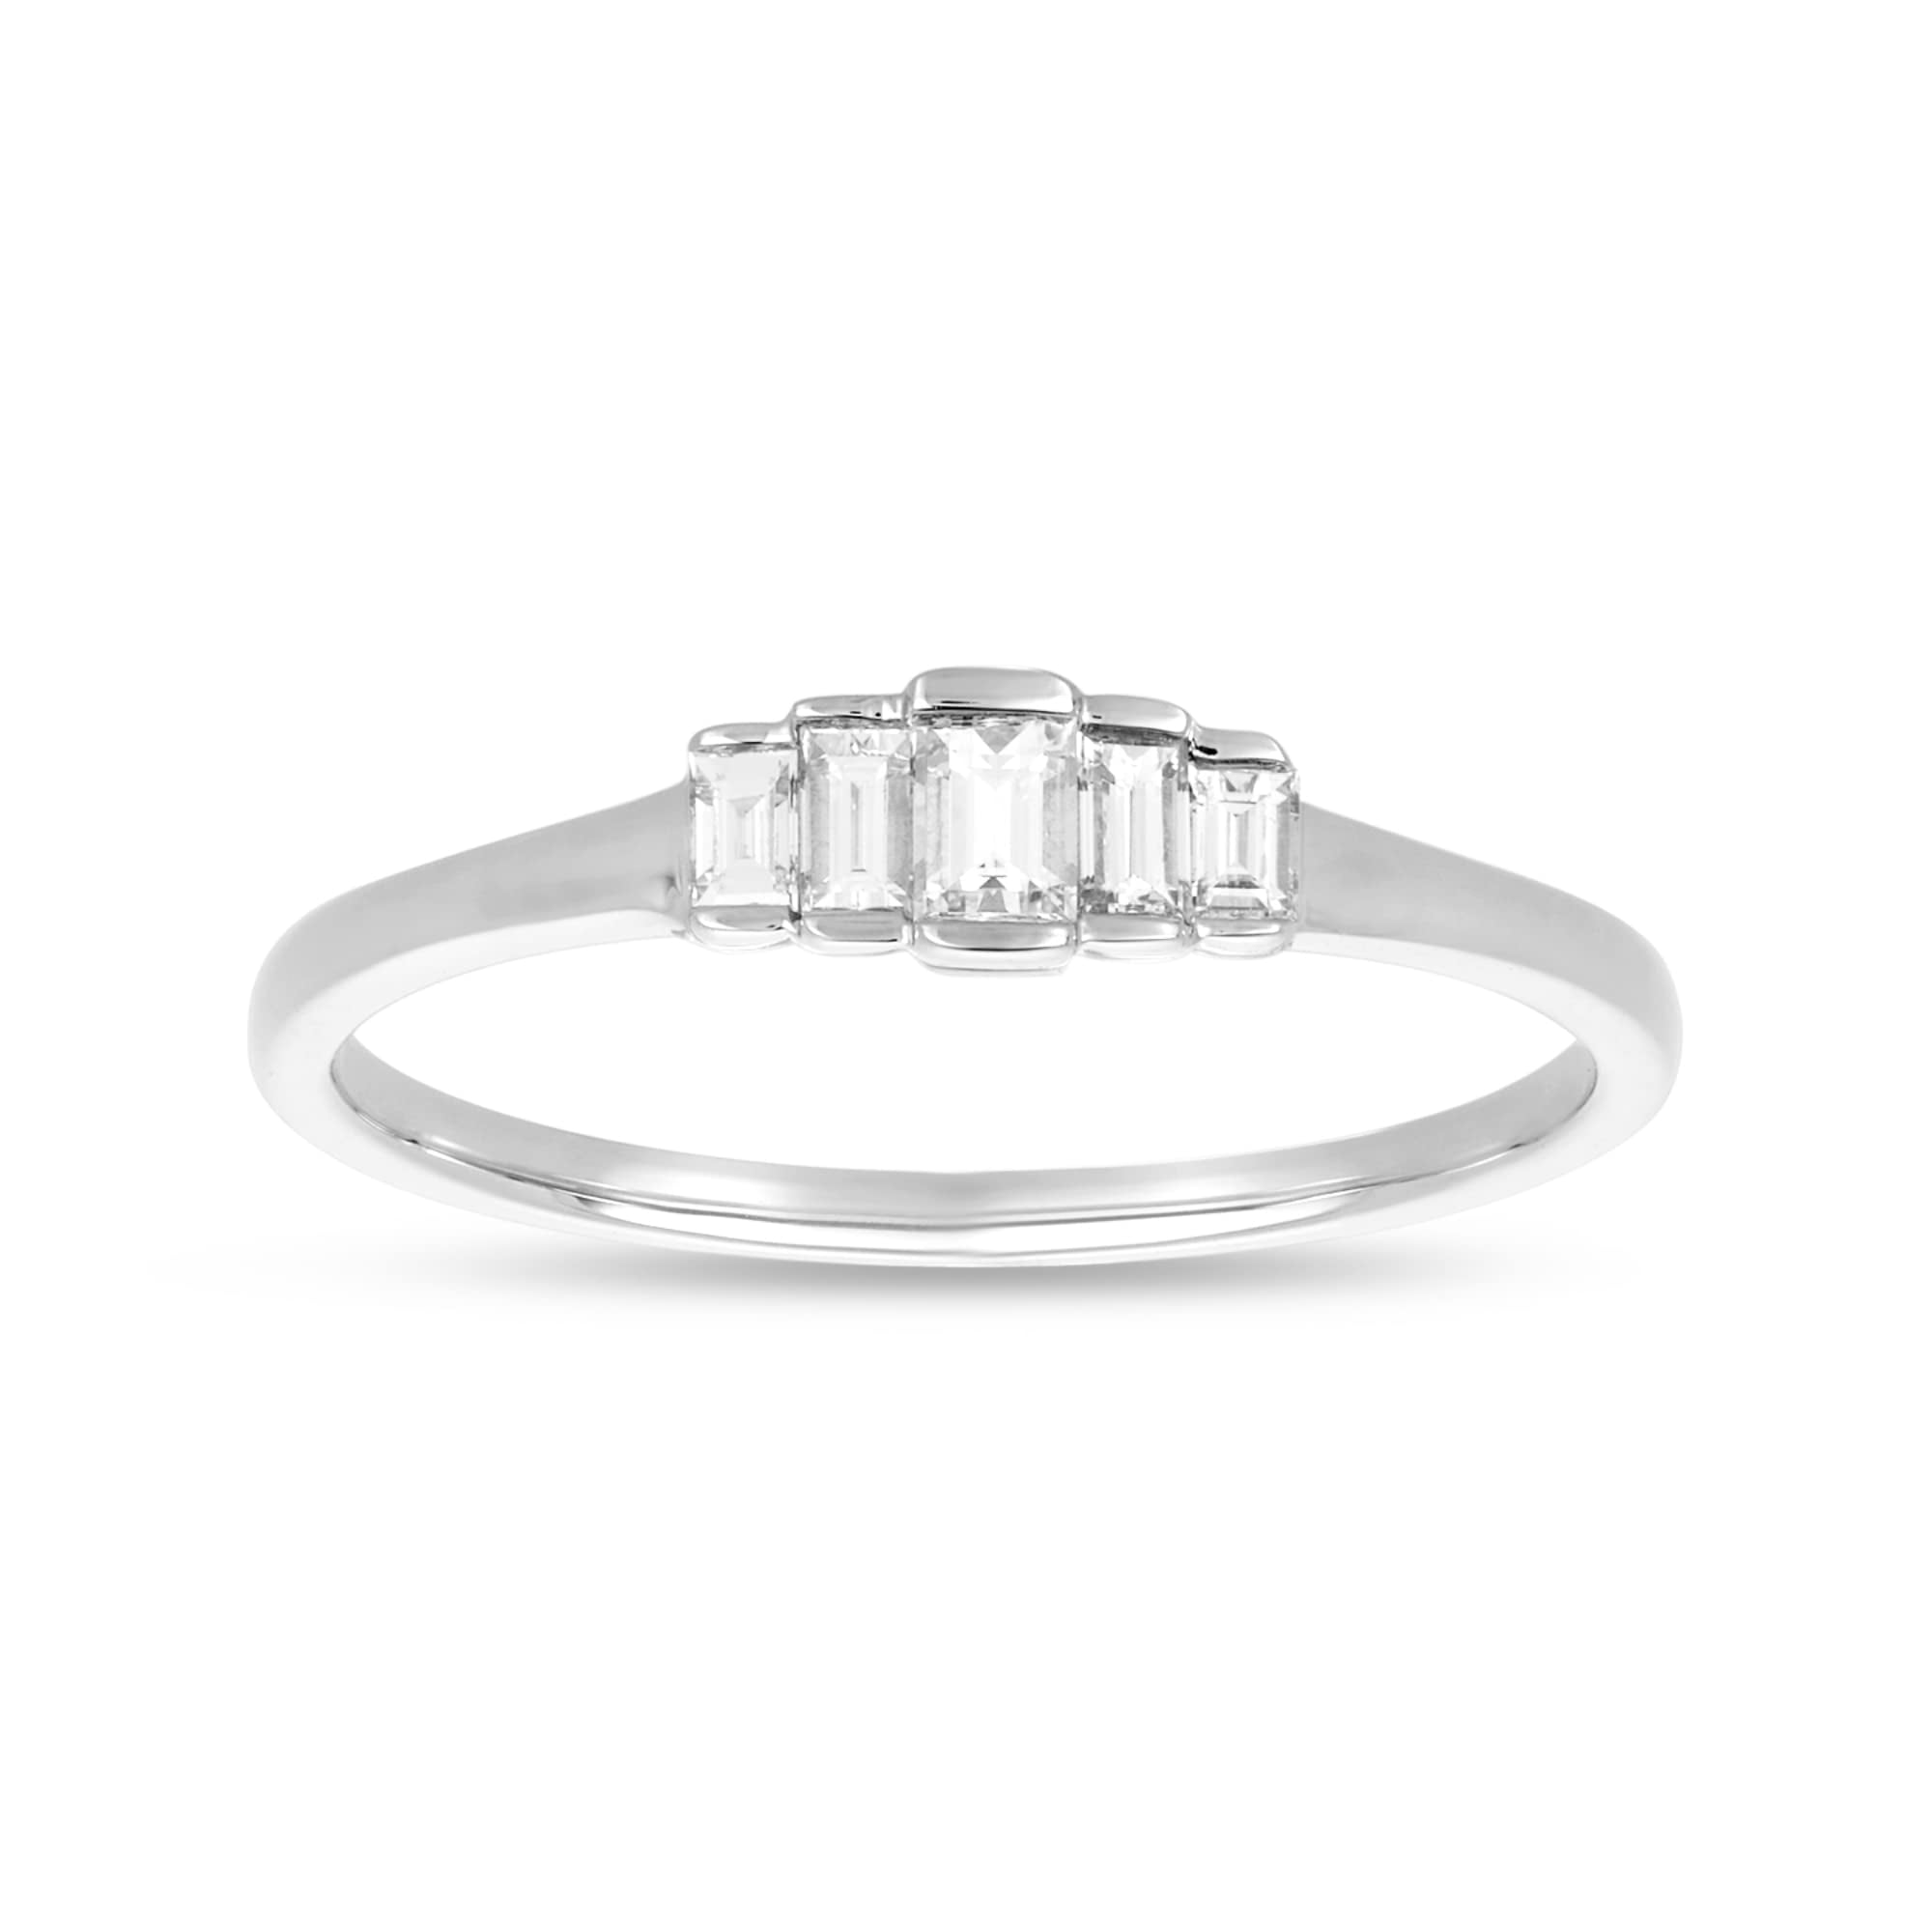 Details about   Certified 0.50 Ct White Diamond Eternity Wedding Band For Women's 14k White Gold